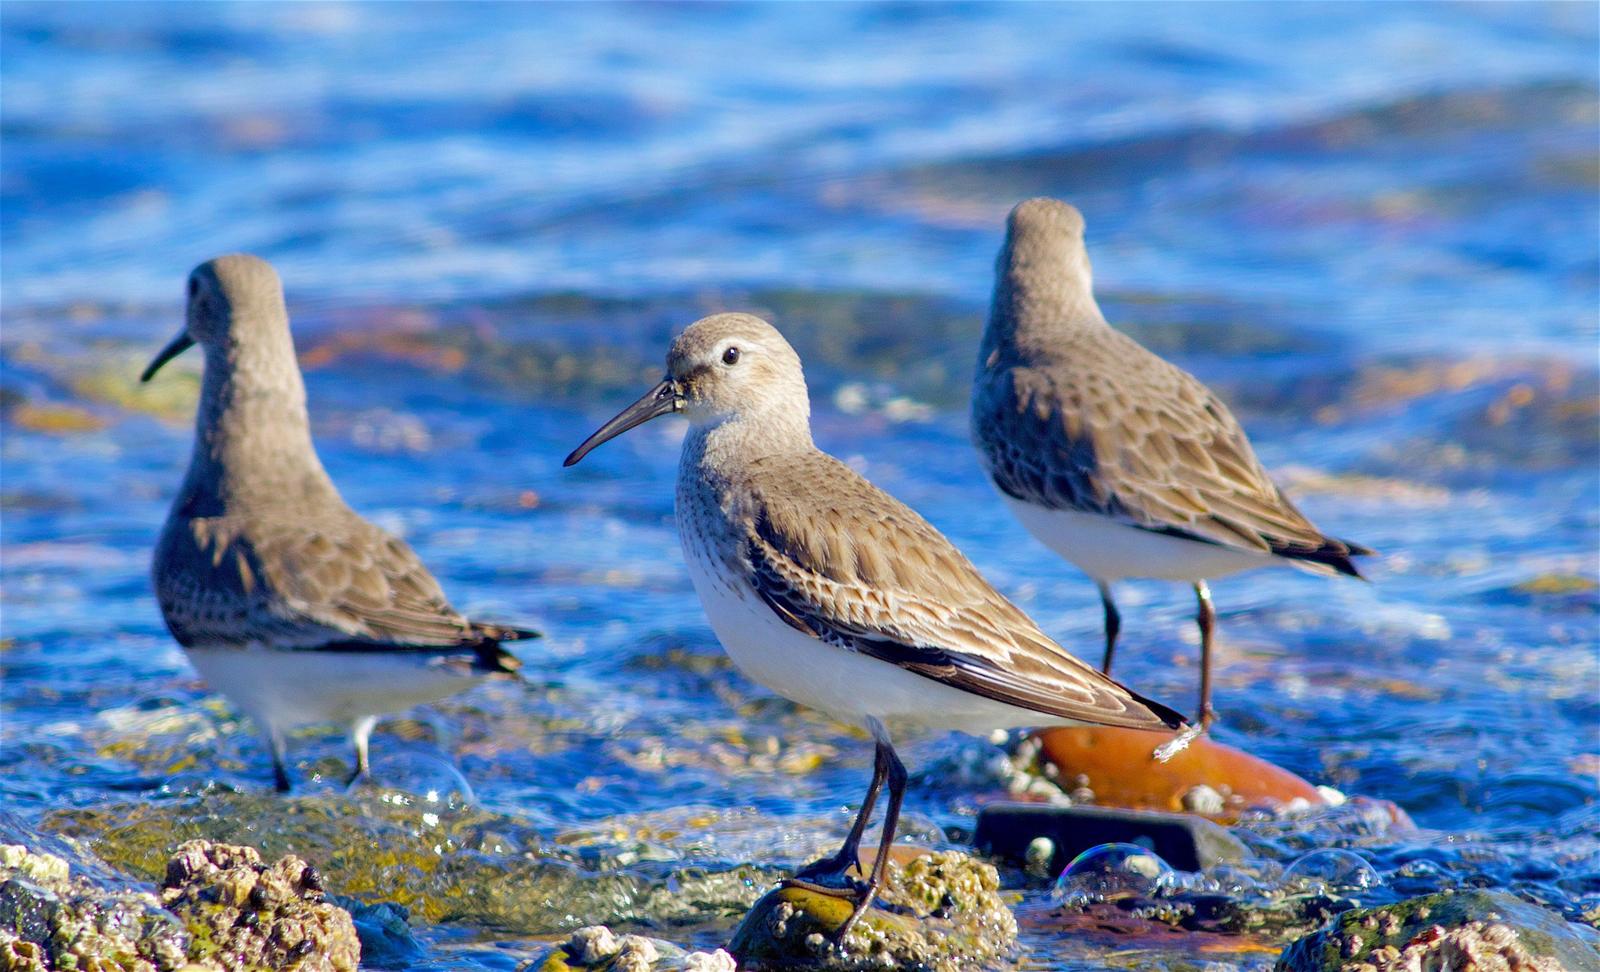 Dunlin Photo by Kathryn Keith